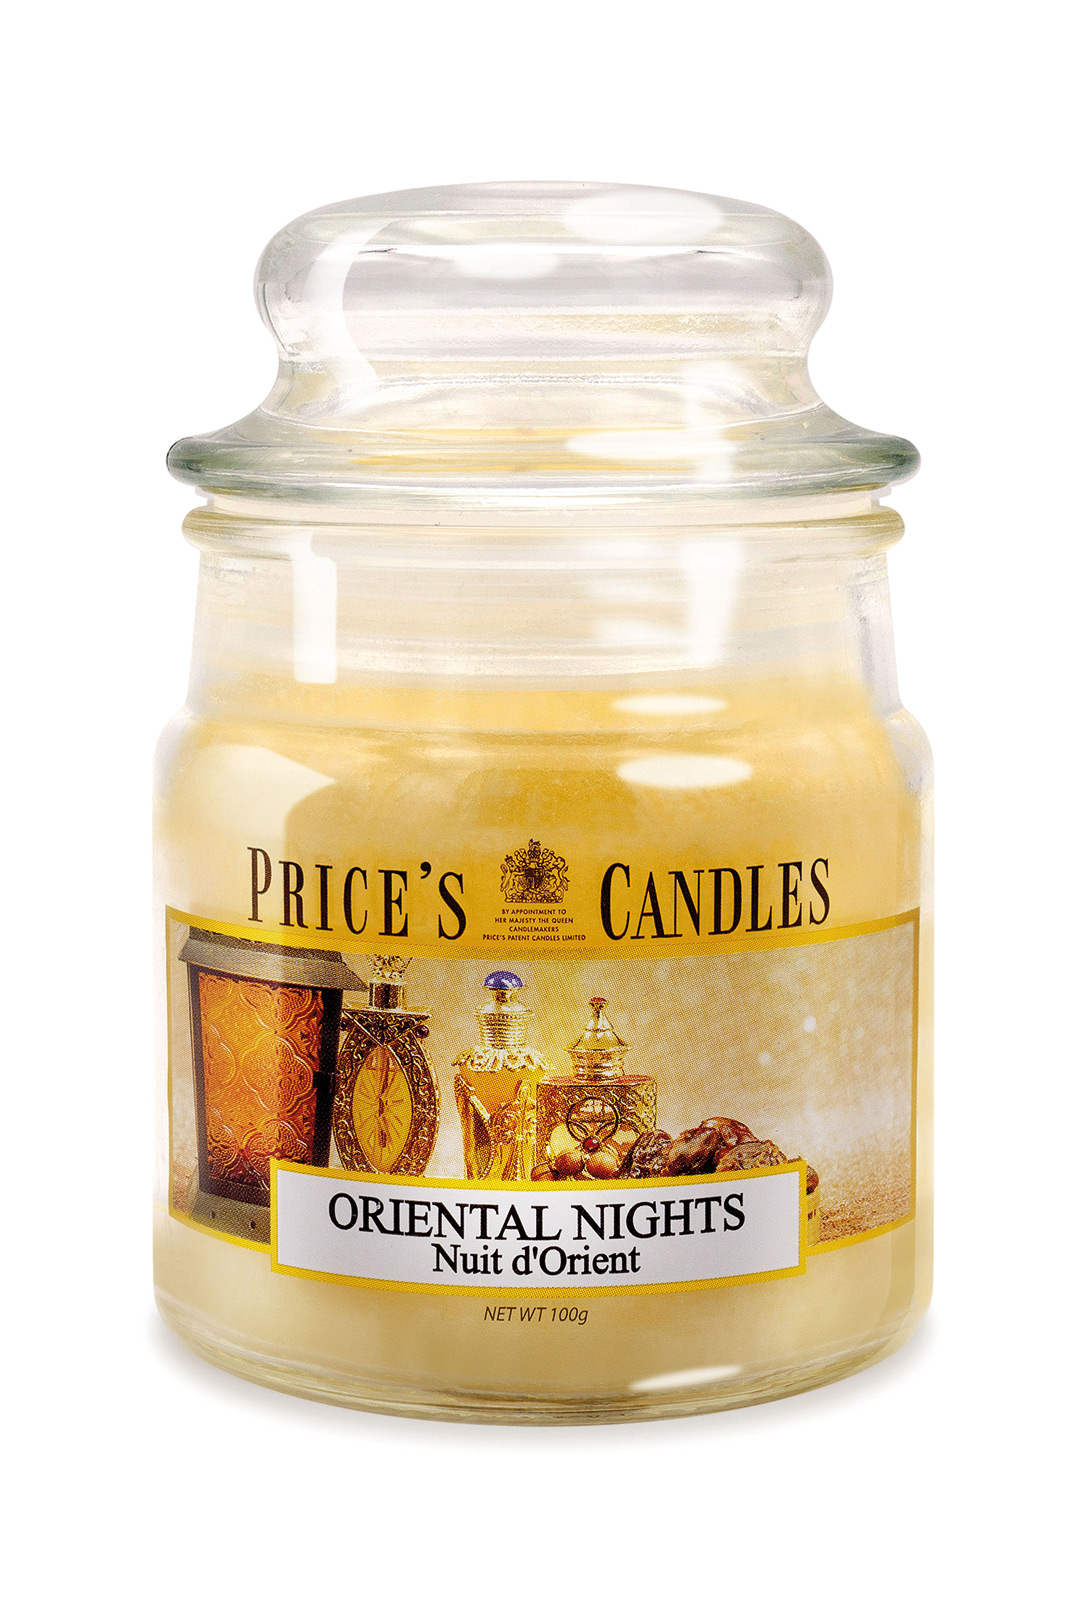 Prices Candle "Oriental Nights" 100g   